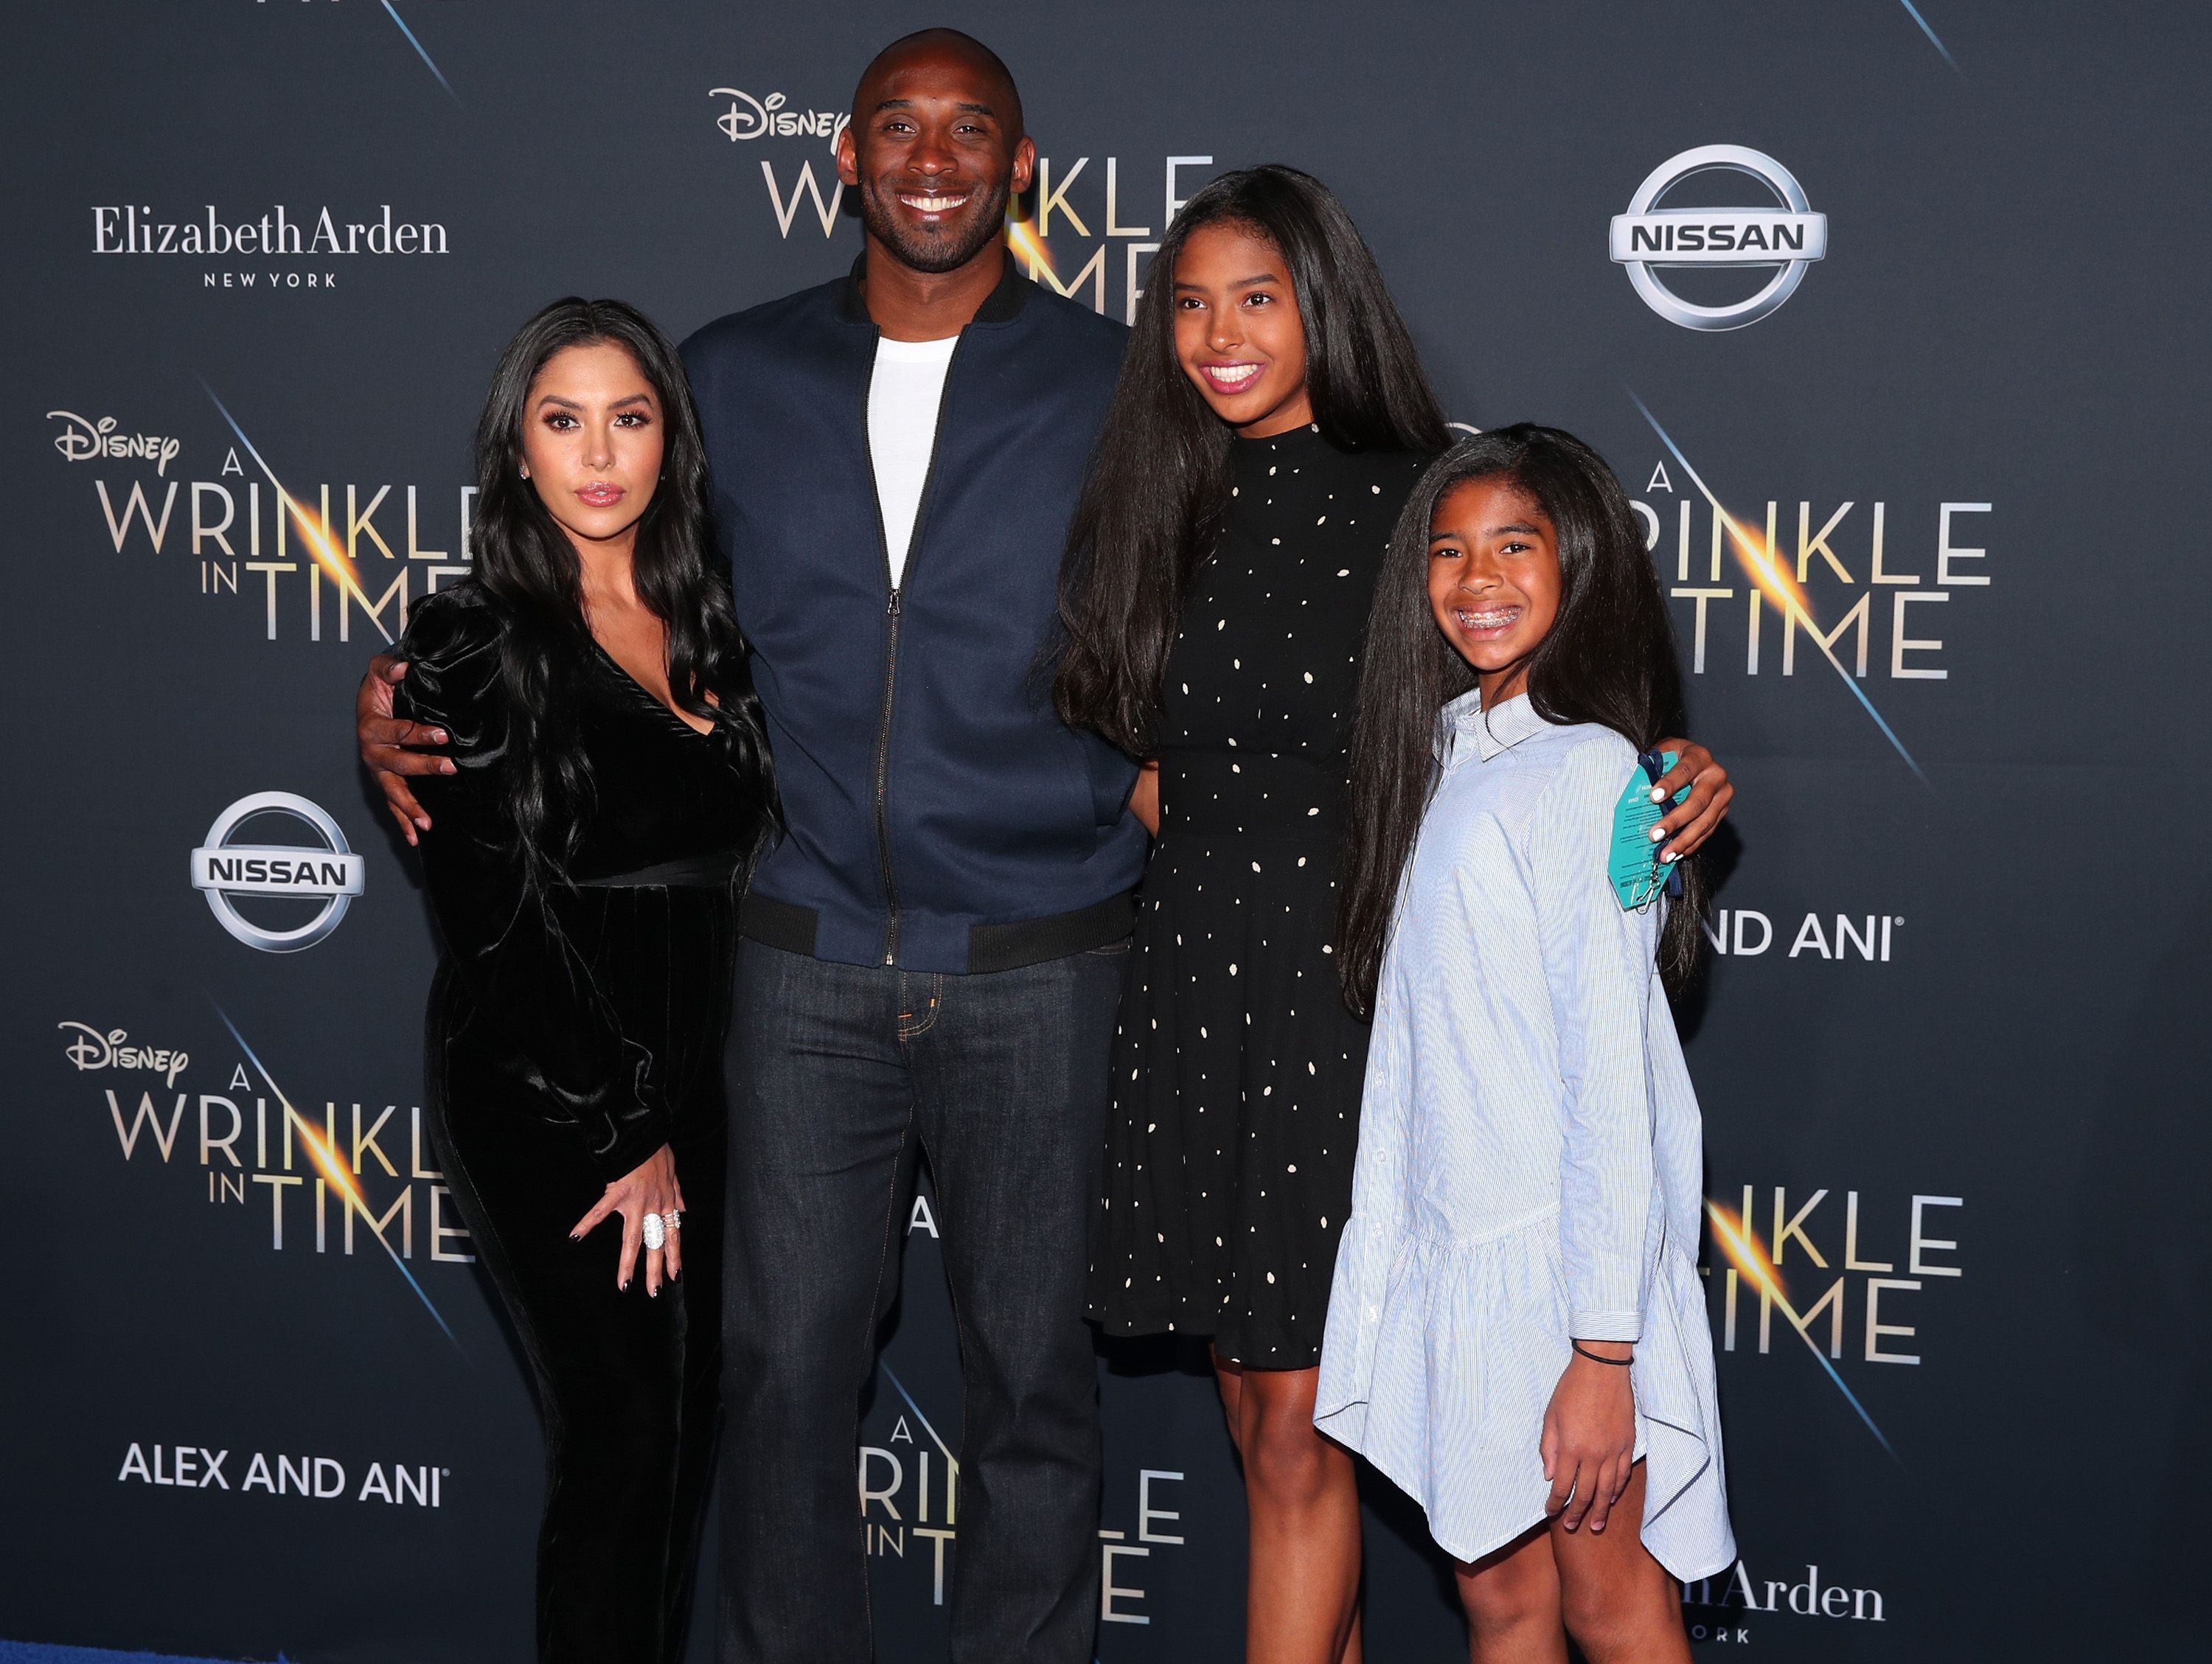 Vanessa and Kobe Bryant and their children at the premiere of "A Wrinkle In Time" on February 26, 2018, in Los Angeles, California | Photo: Christopher Polk/Getty Images